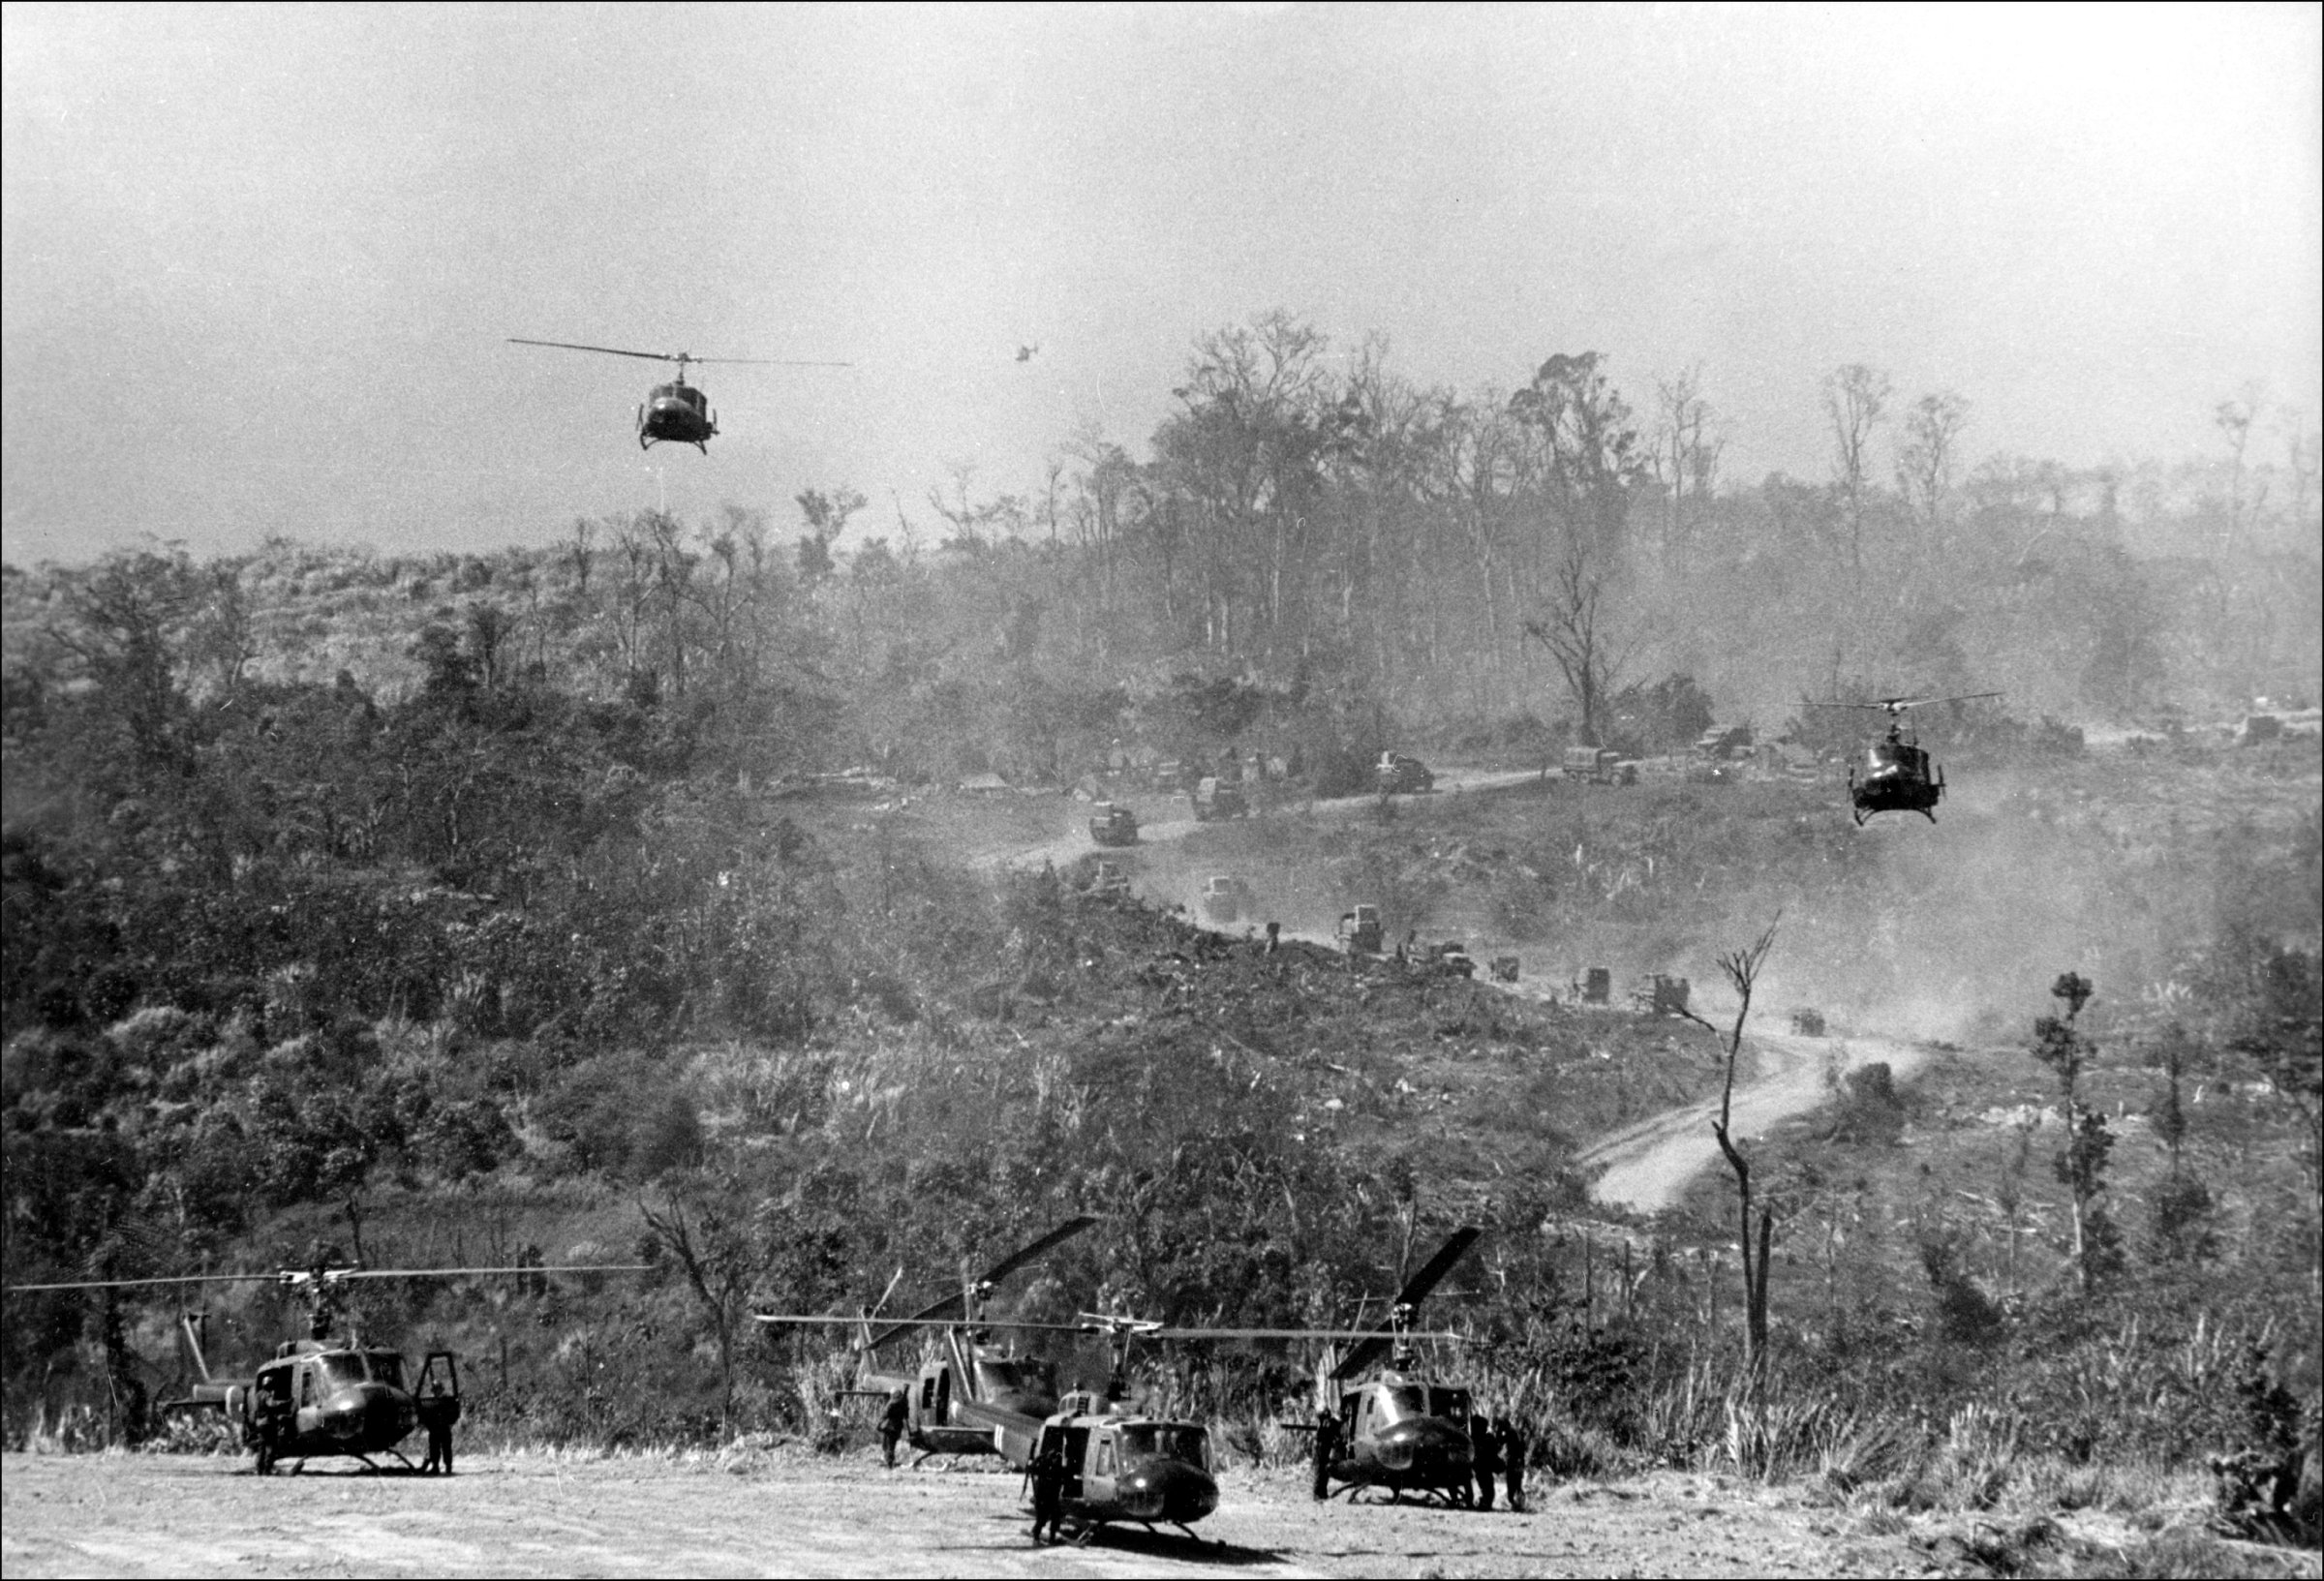 American helicopters land at Khe Sanh base on the Laos border on Feb. 1, 1971 after it was "reactivated" following a Vitcong offensive in Laos.